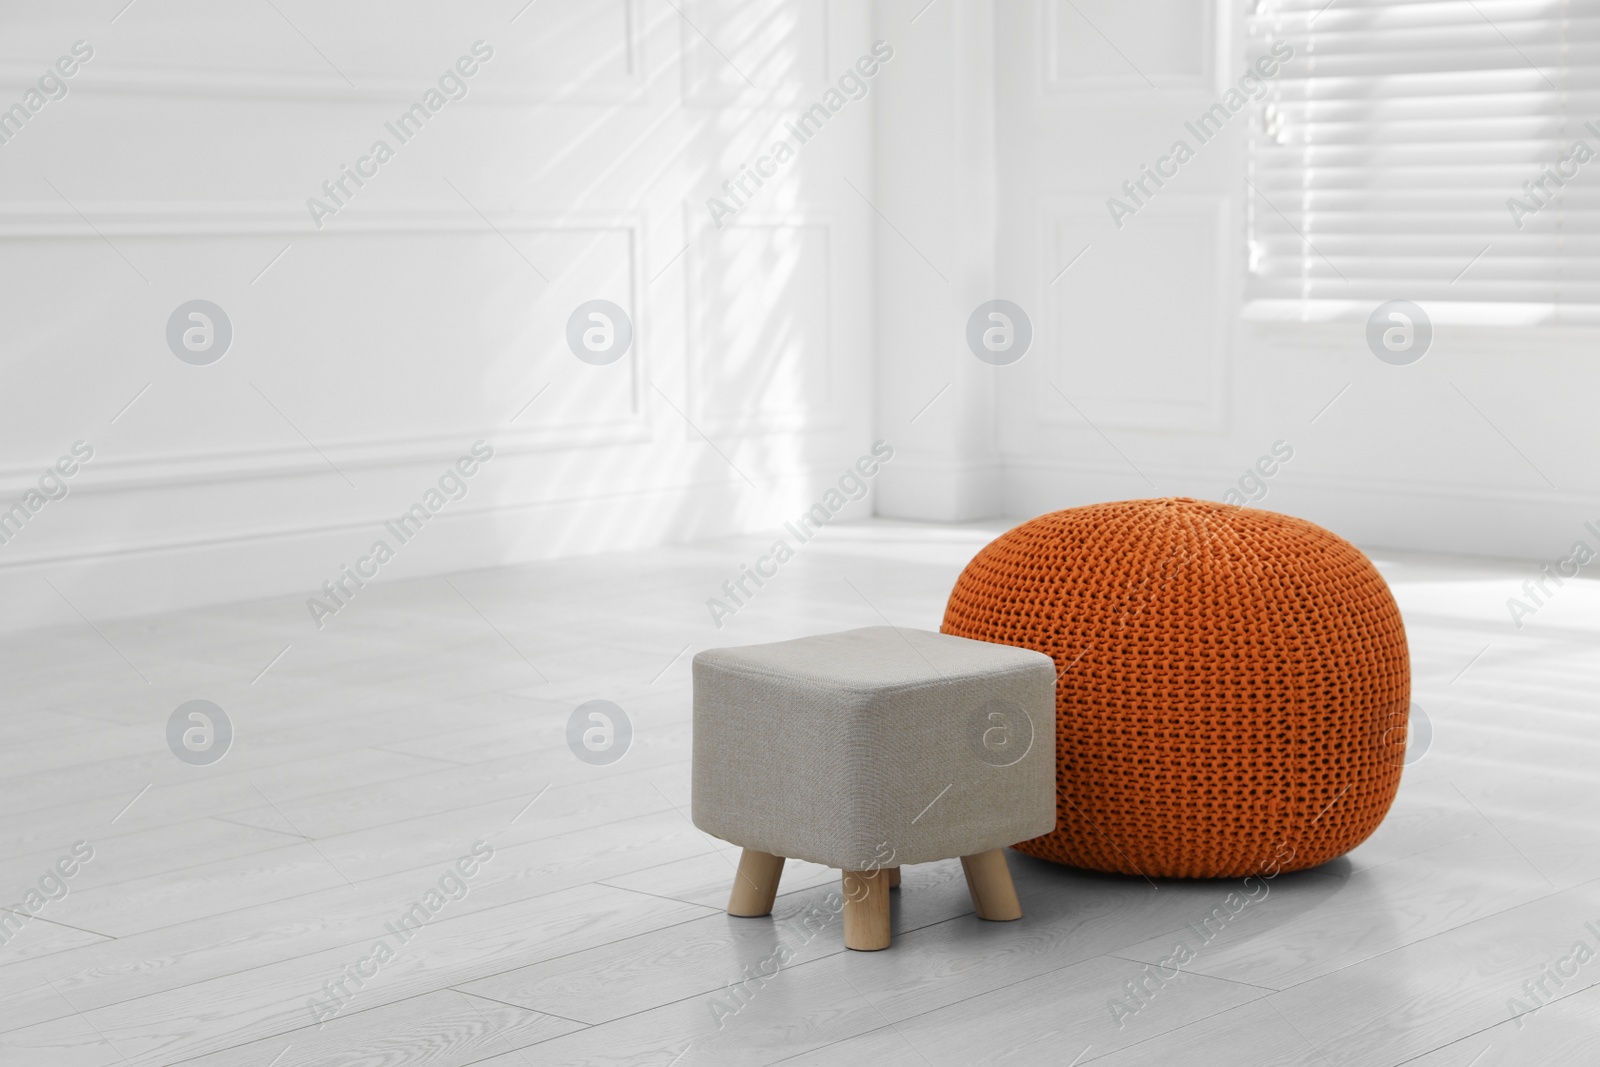 Photo of Stylish pouf and ottoman in room, space for text